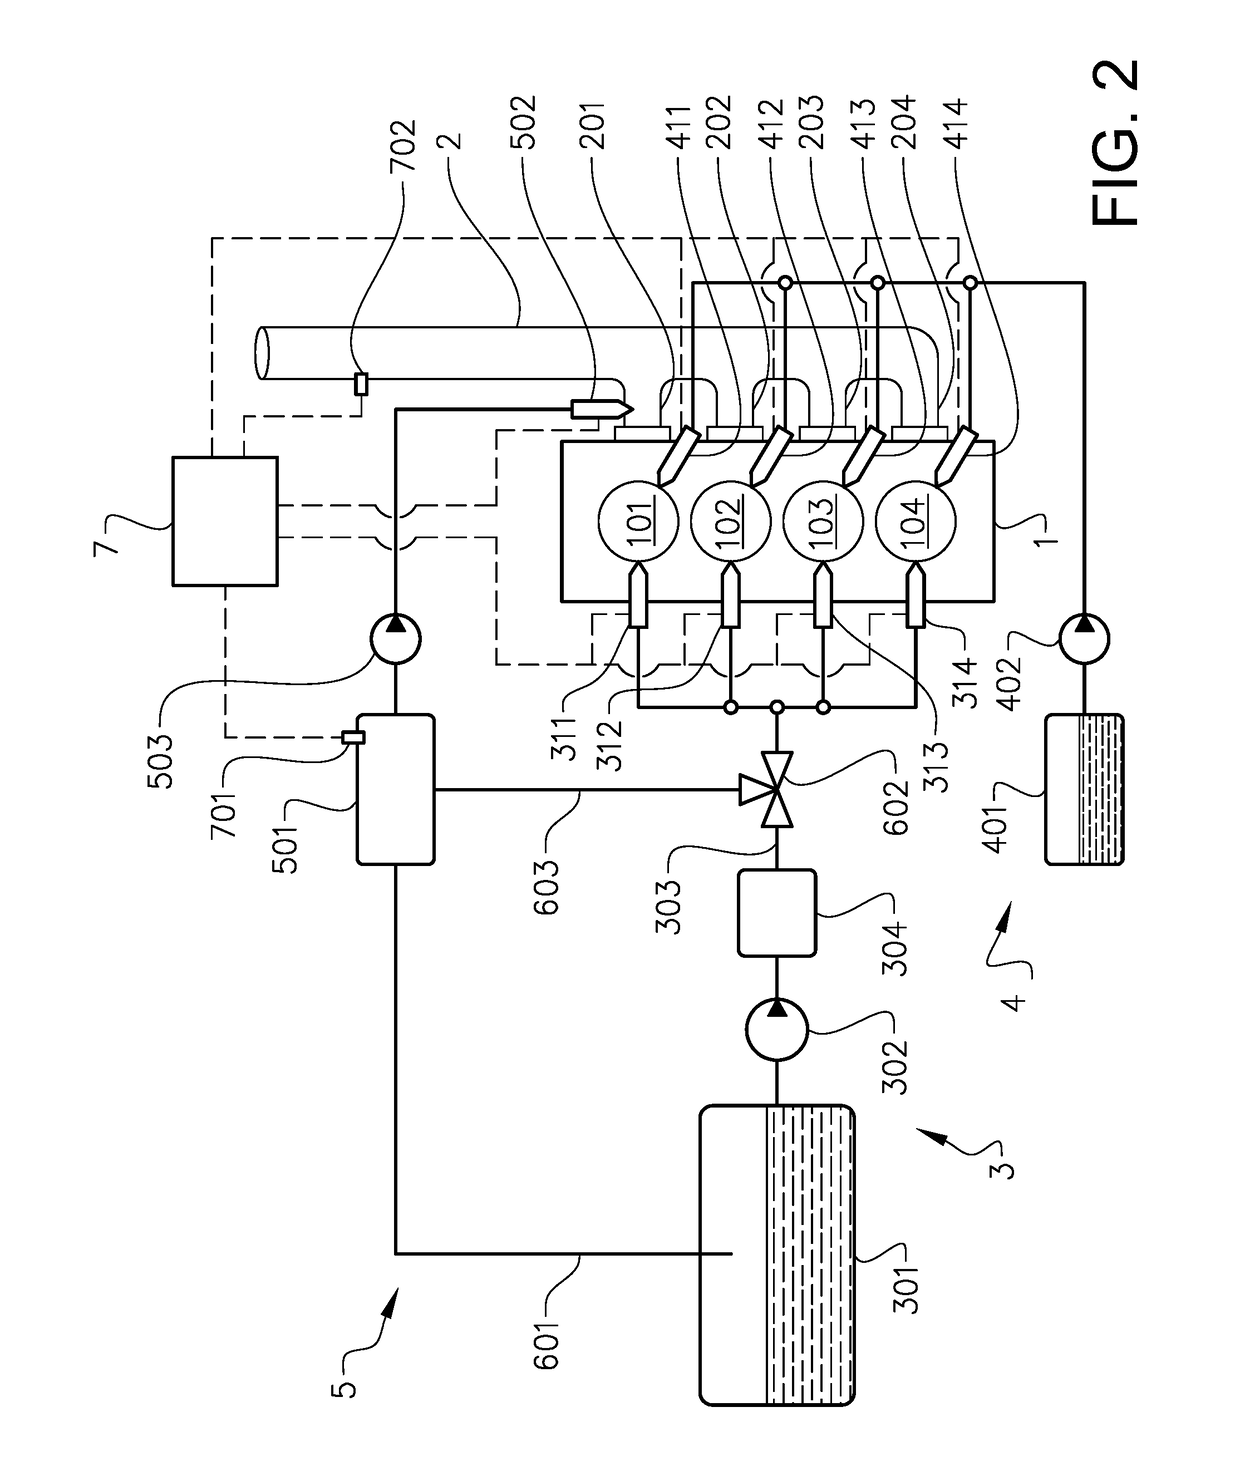 A method for controlling a high pressure gas injection internal combustion engine